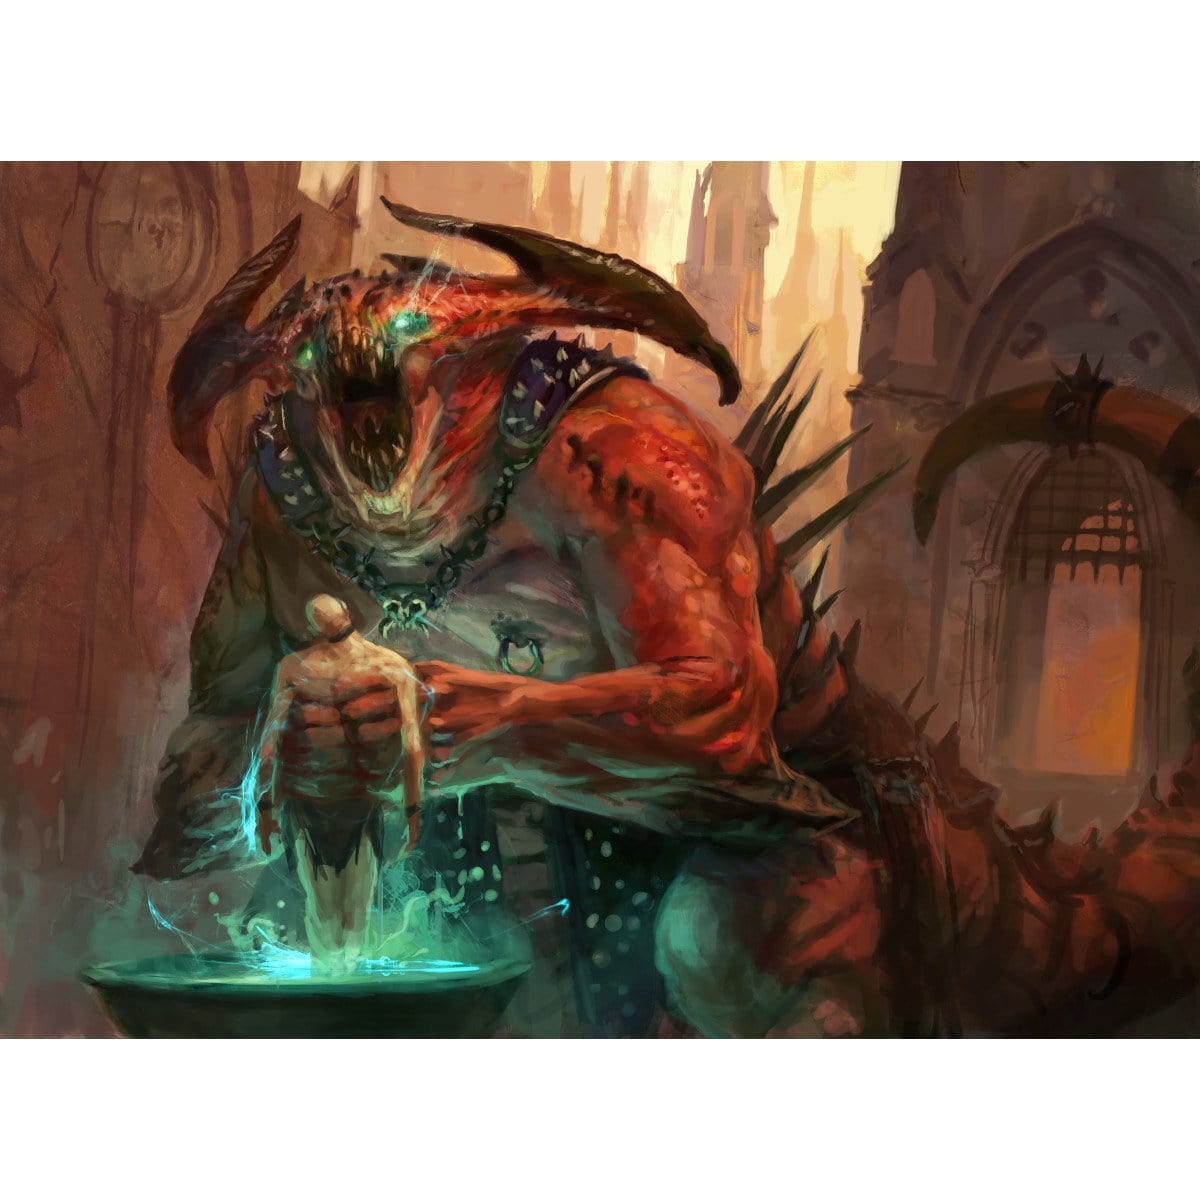 Sire of Insanity Print - Print - Original Magic Art - Accessories for Magic the Gathering and other card games